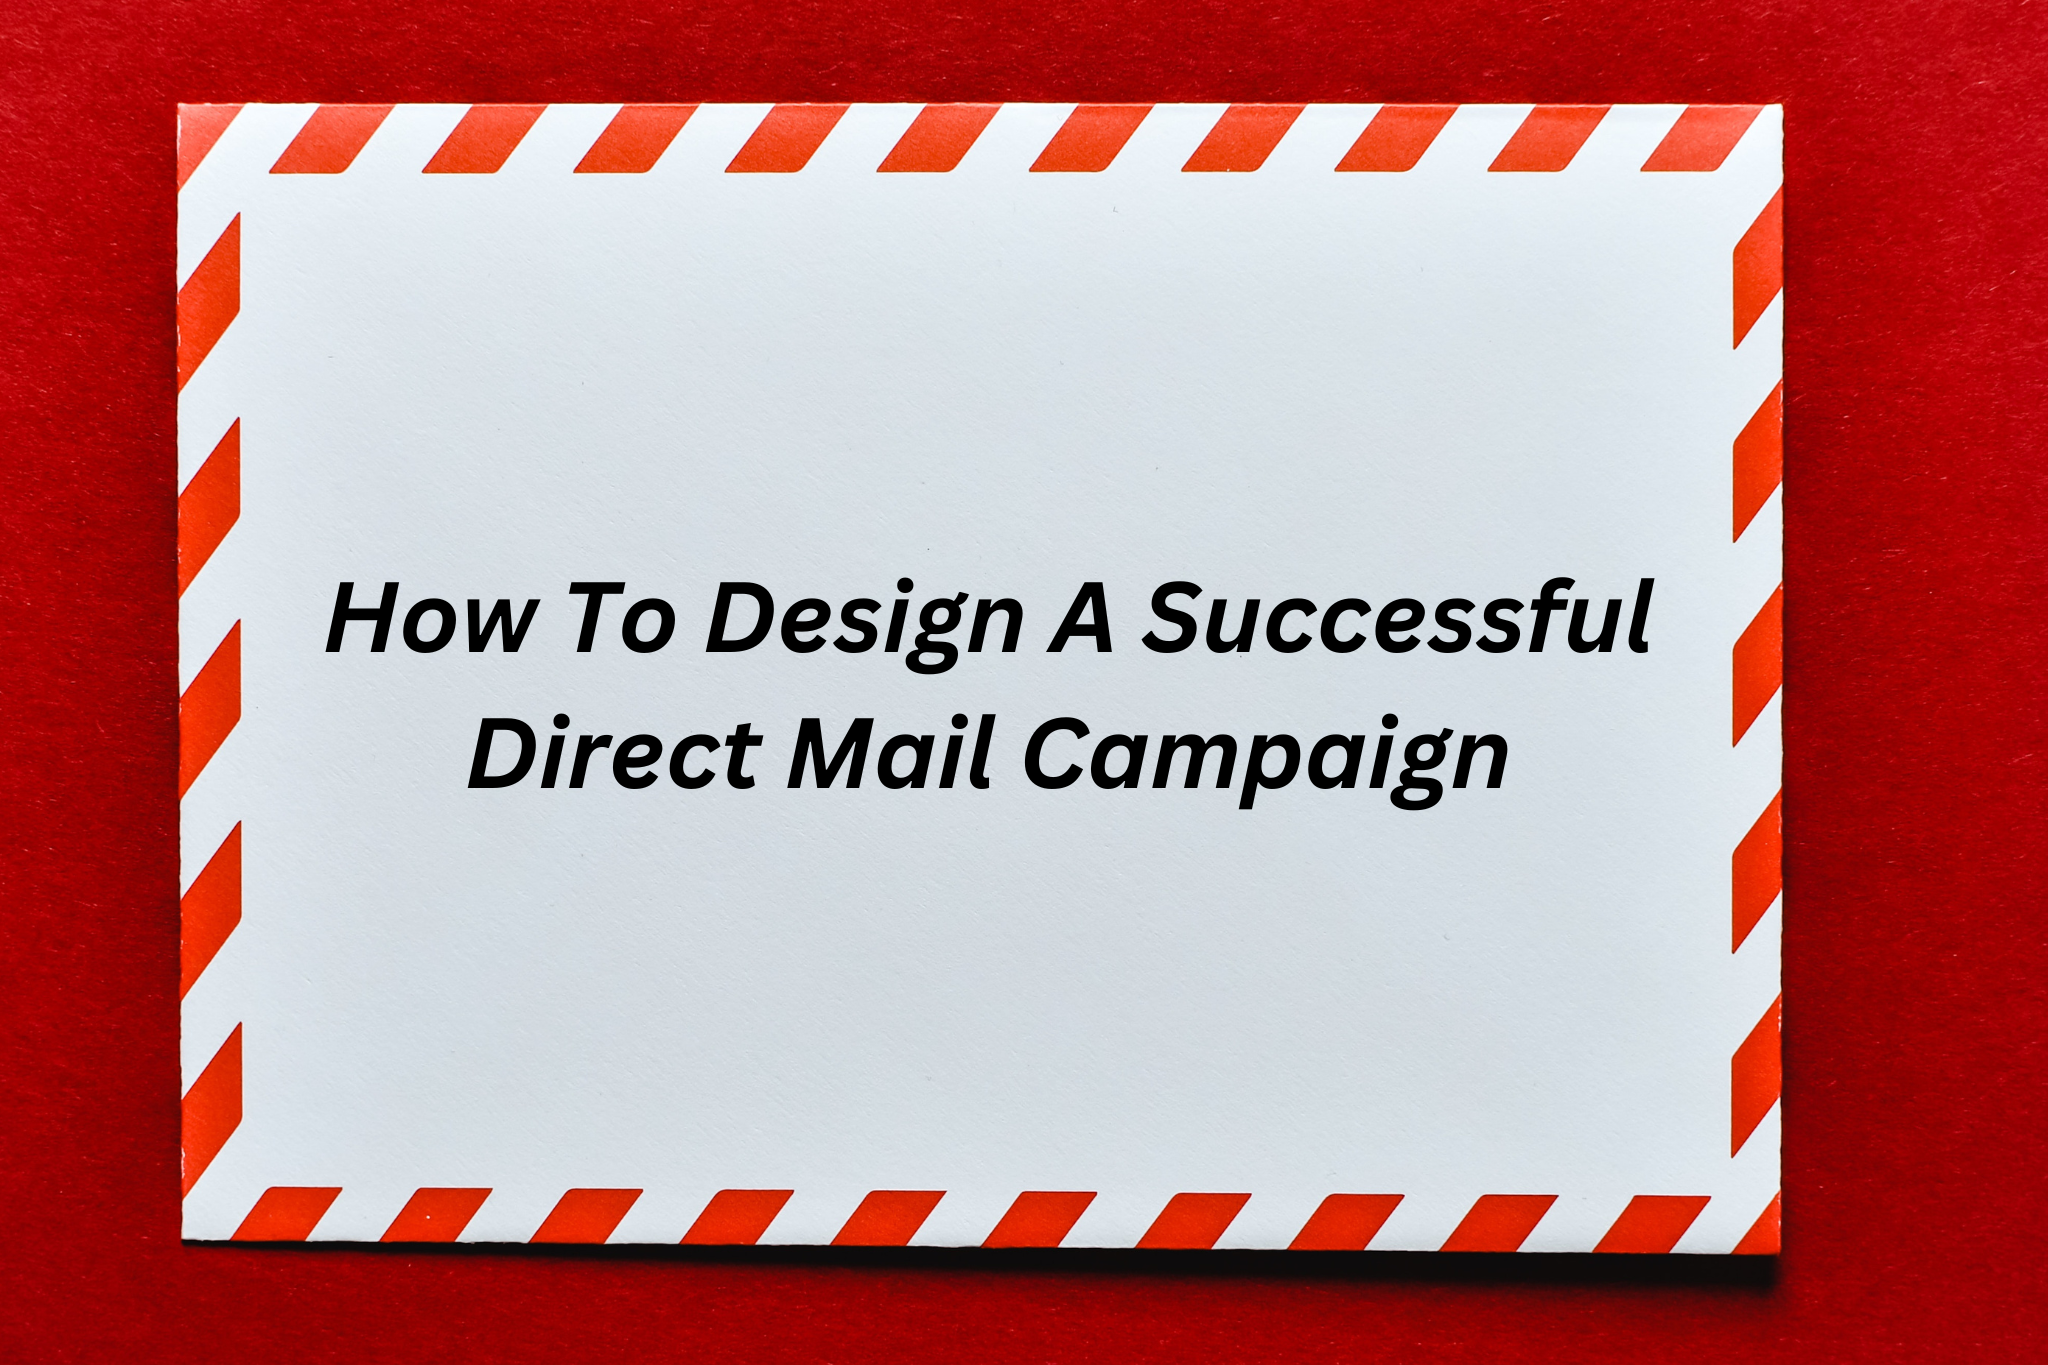 How To Design A Successful Direct Mail Campaign